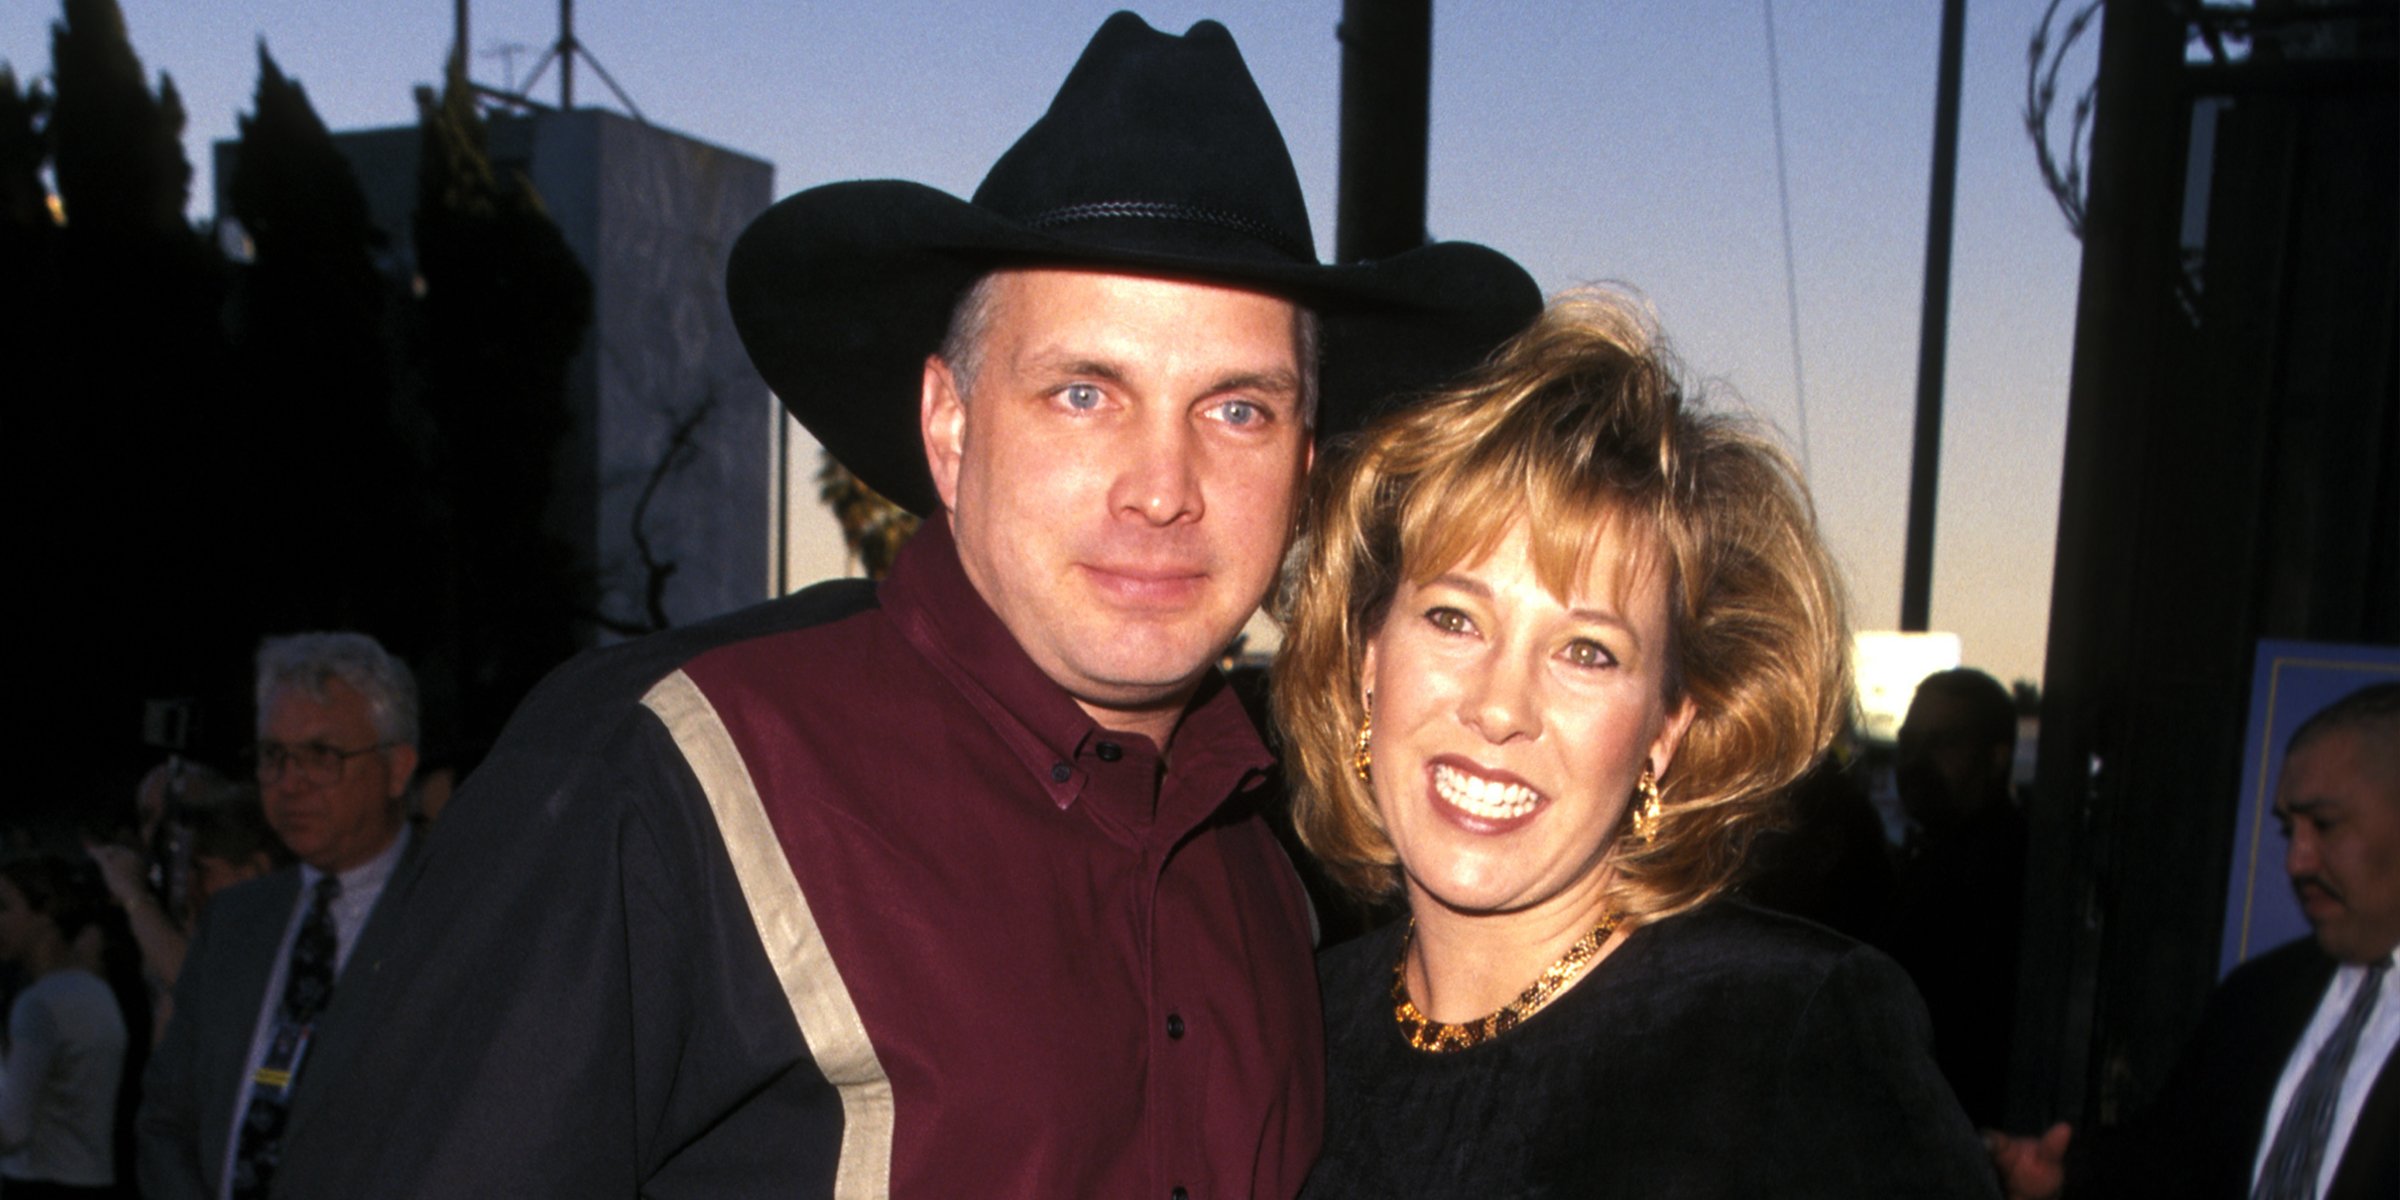 Garth Brooks and Sany Mahl. | Source: Getty Images